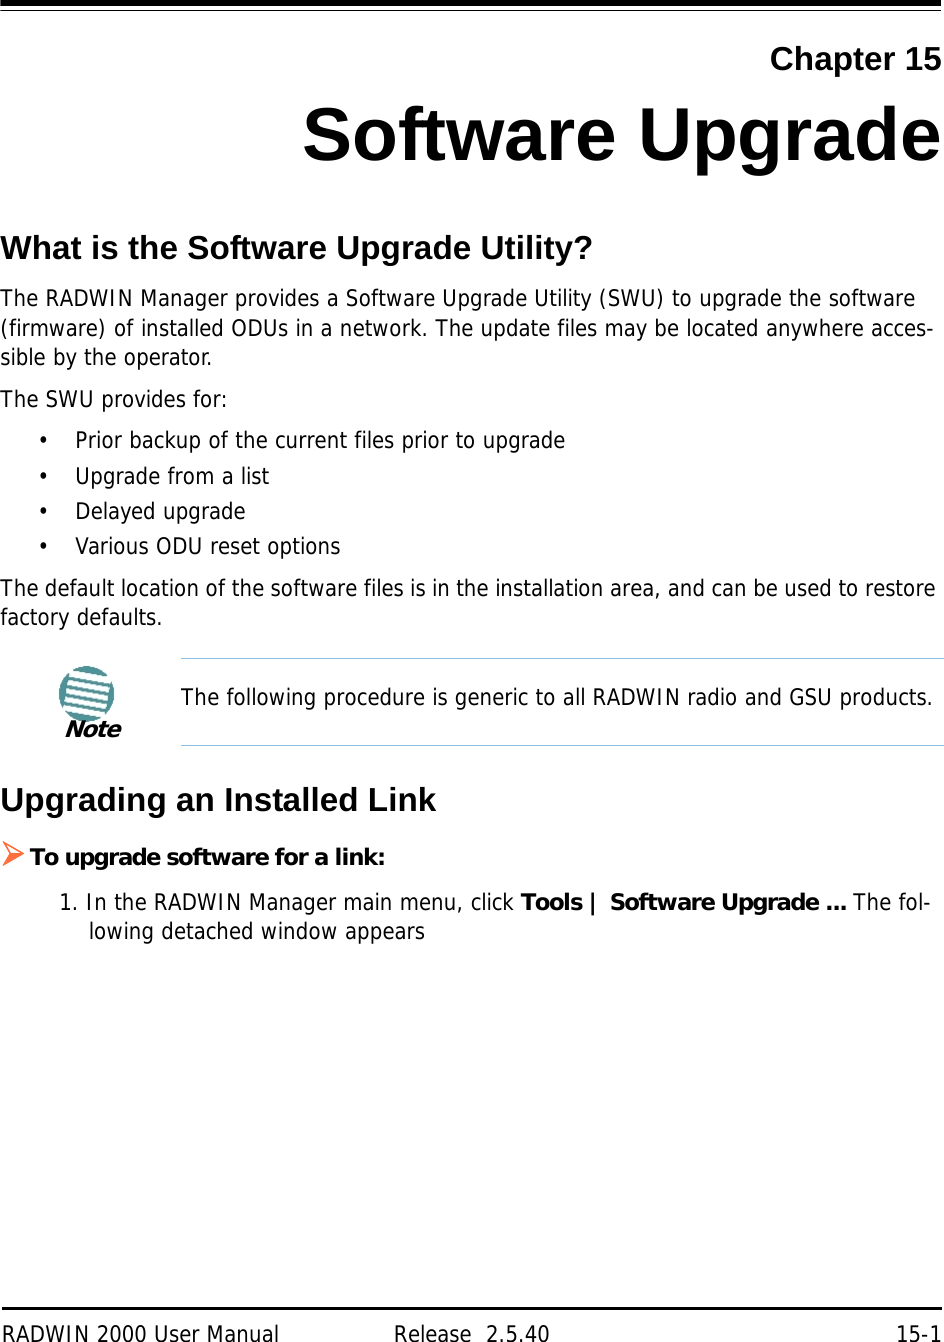 RADWIN 2000 User Manual Release  2.5.40 15-1Chapter 15Software UpgradeWhat is the Software Upgrade Utility?The RADWIN Manager provides a Software Upgrade Utility (SWU) to upgrade the software (firmware) of installed ODUs in a network. The update files may be located anywhere acces-sible by the operator.The SWU provides for:• Prior backup of the current files prior to upgrade• Upgrade from a list• Delayed upgrade• Various ODU reset optionsThe default location of the software files is in the installation area, and can be used to restore factory defaults.Upgrading an Installed LinkTo upgrade software for a link:1. In the RADWIN Manager main menu, click Tools | Software Upgrade ... The fol-lowing detached window appearsNoteThe following procedure is generic to all RADWIN radio and GSU products.